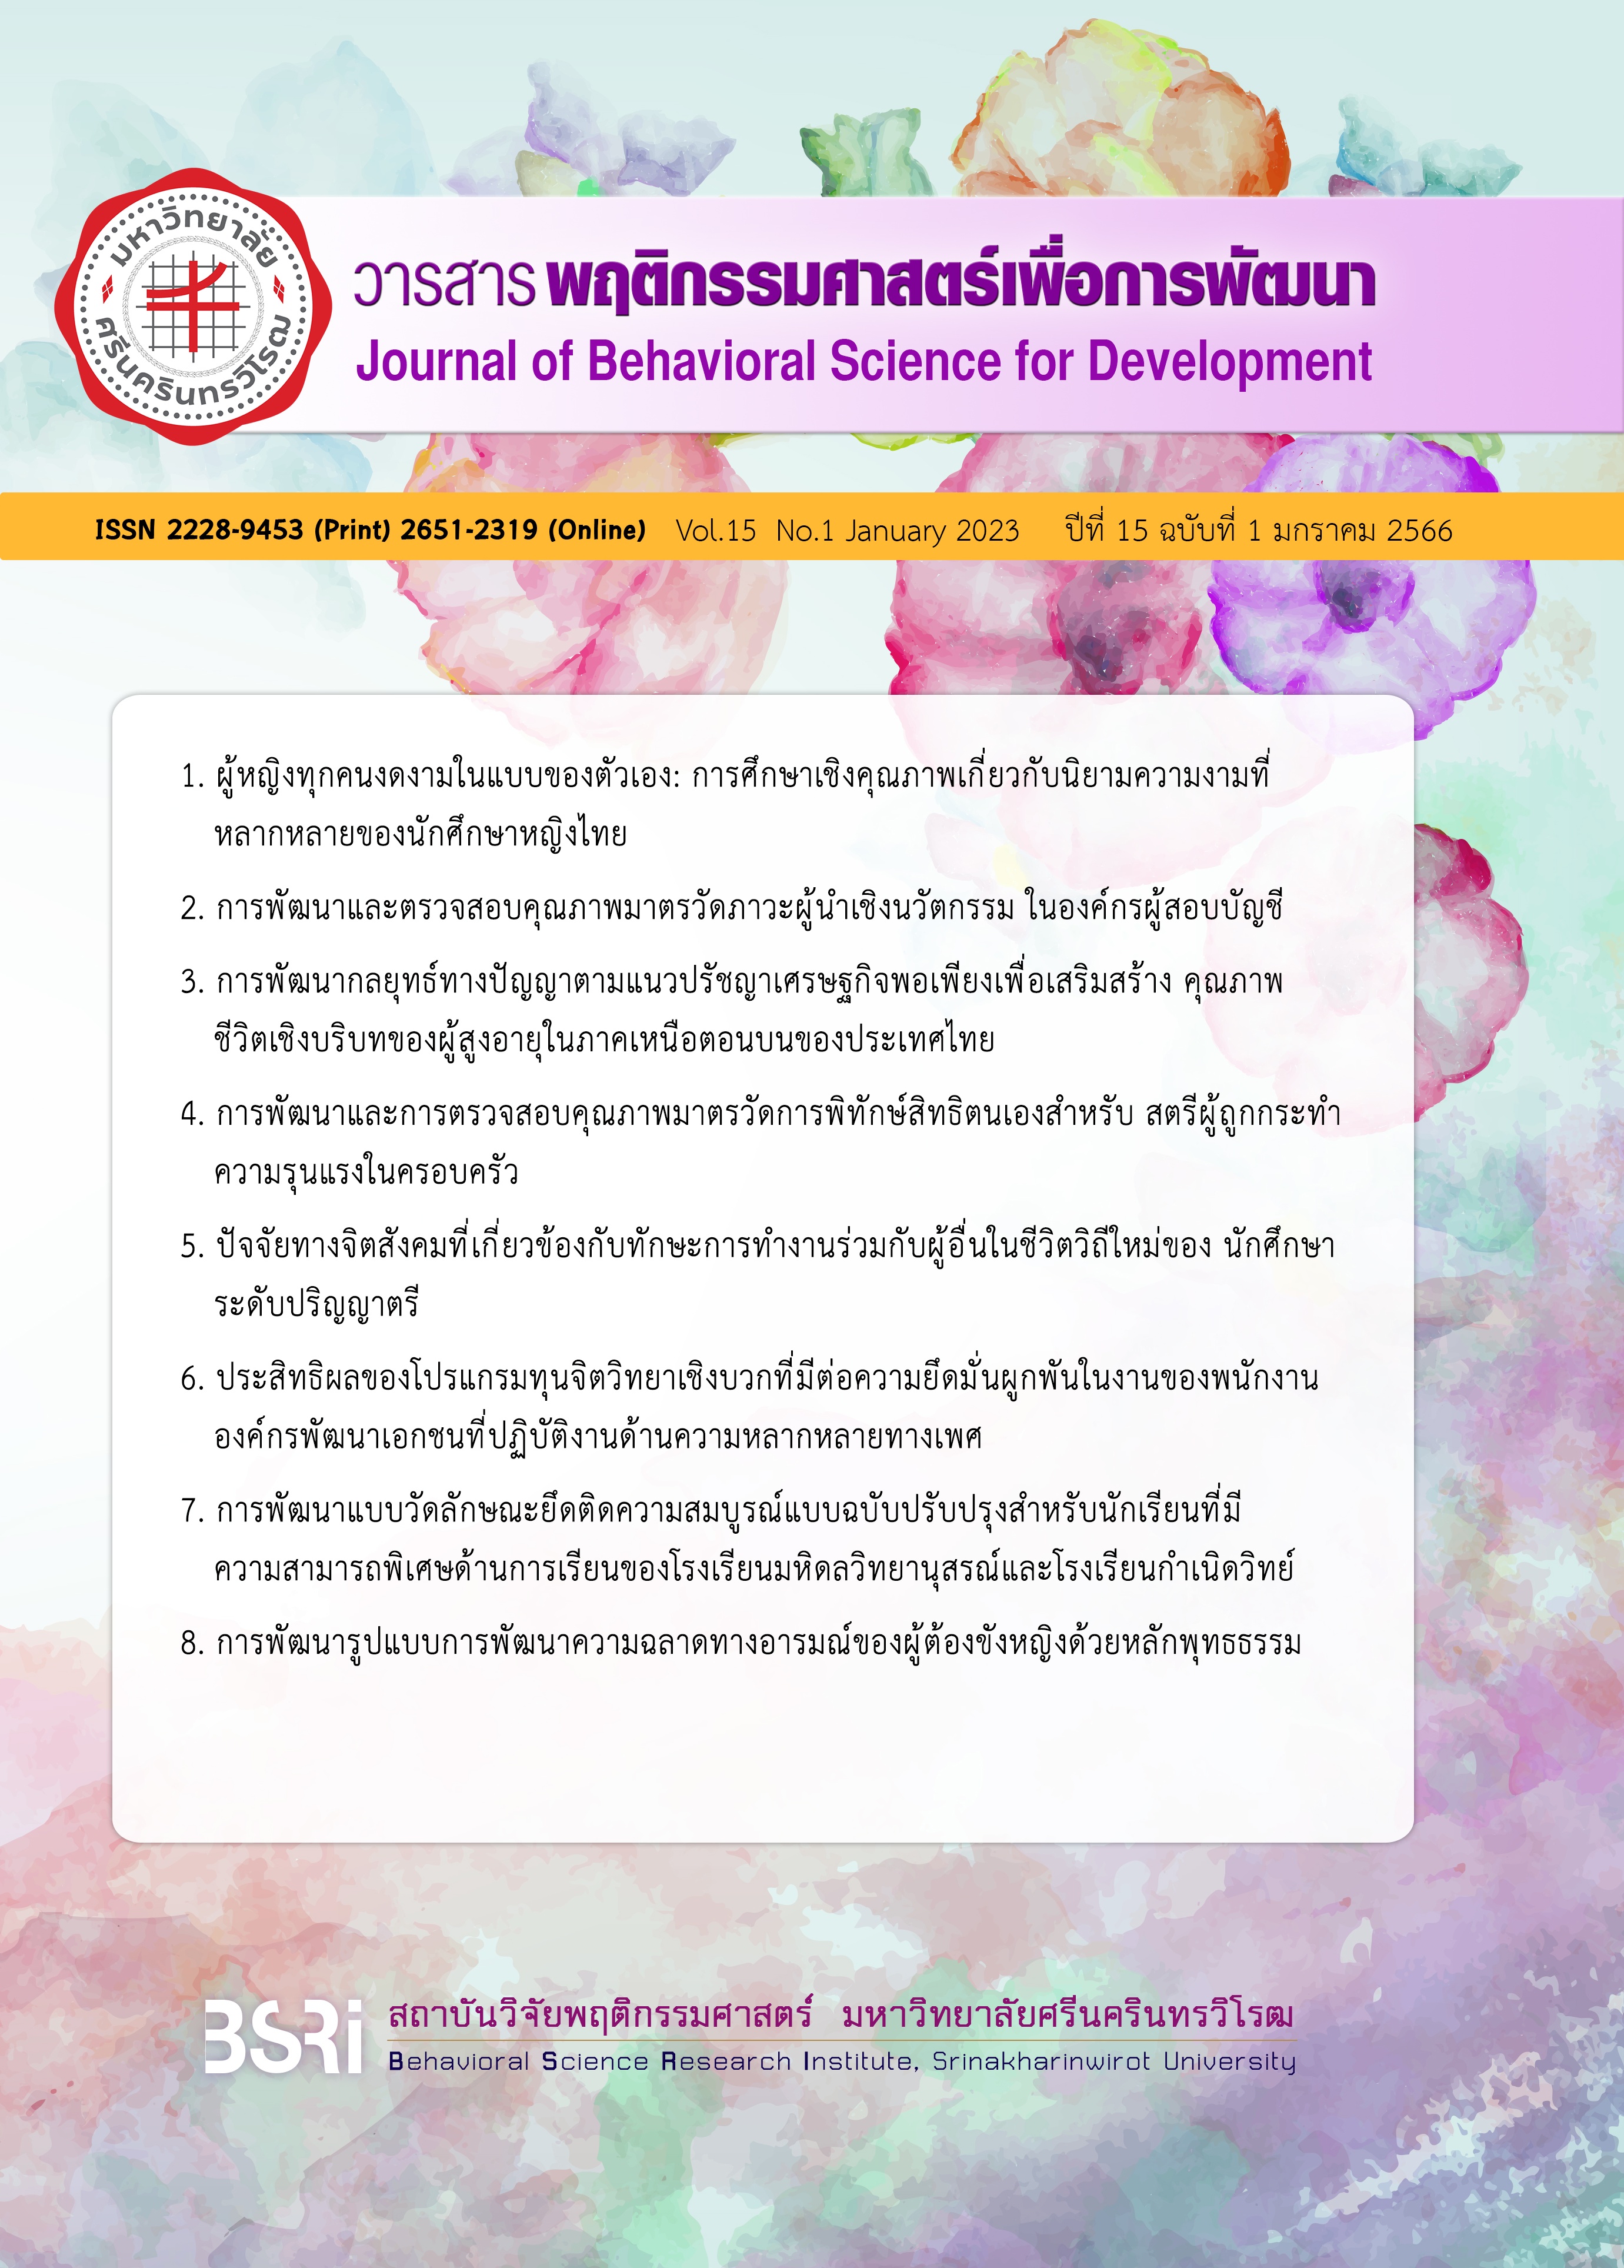 					View Vol. 15 No. 1 (2023): Journal of Behavioral Science for Development  Vol. 15 Issue 1 January 2023
				